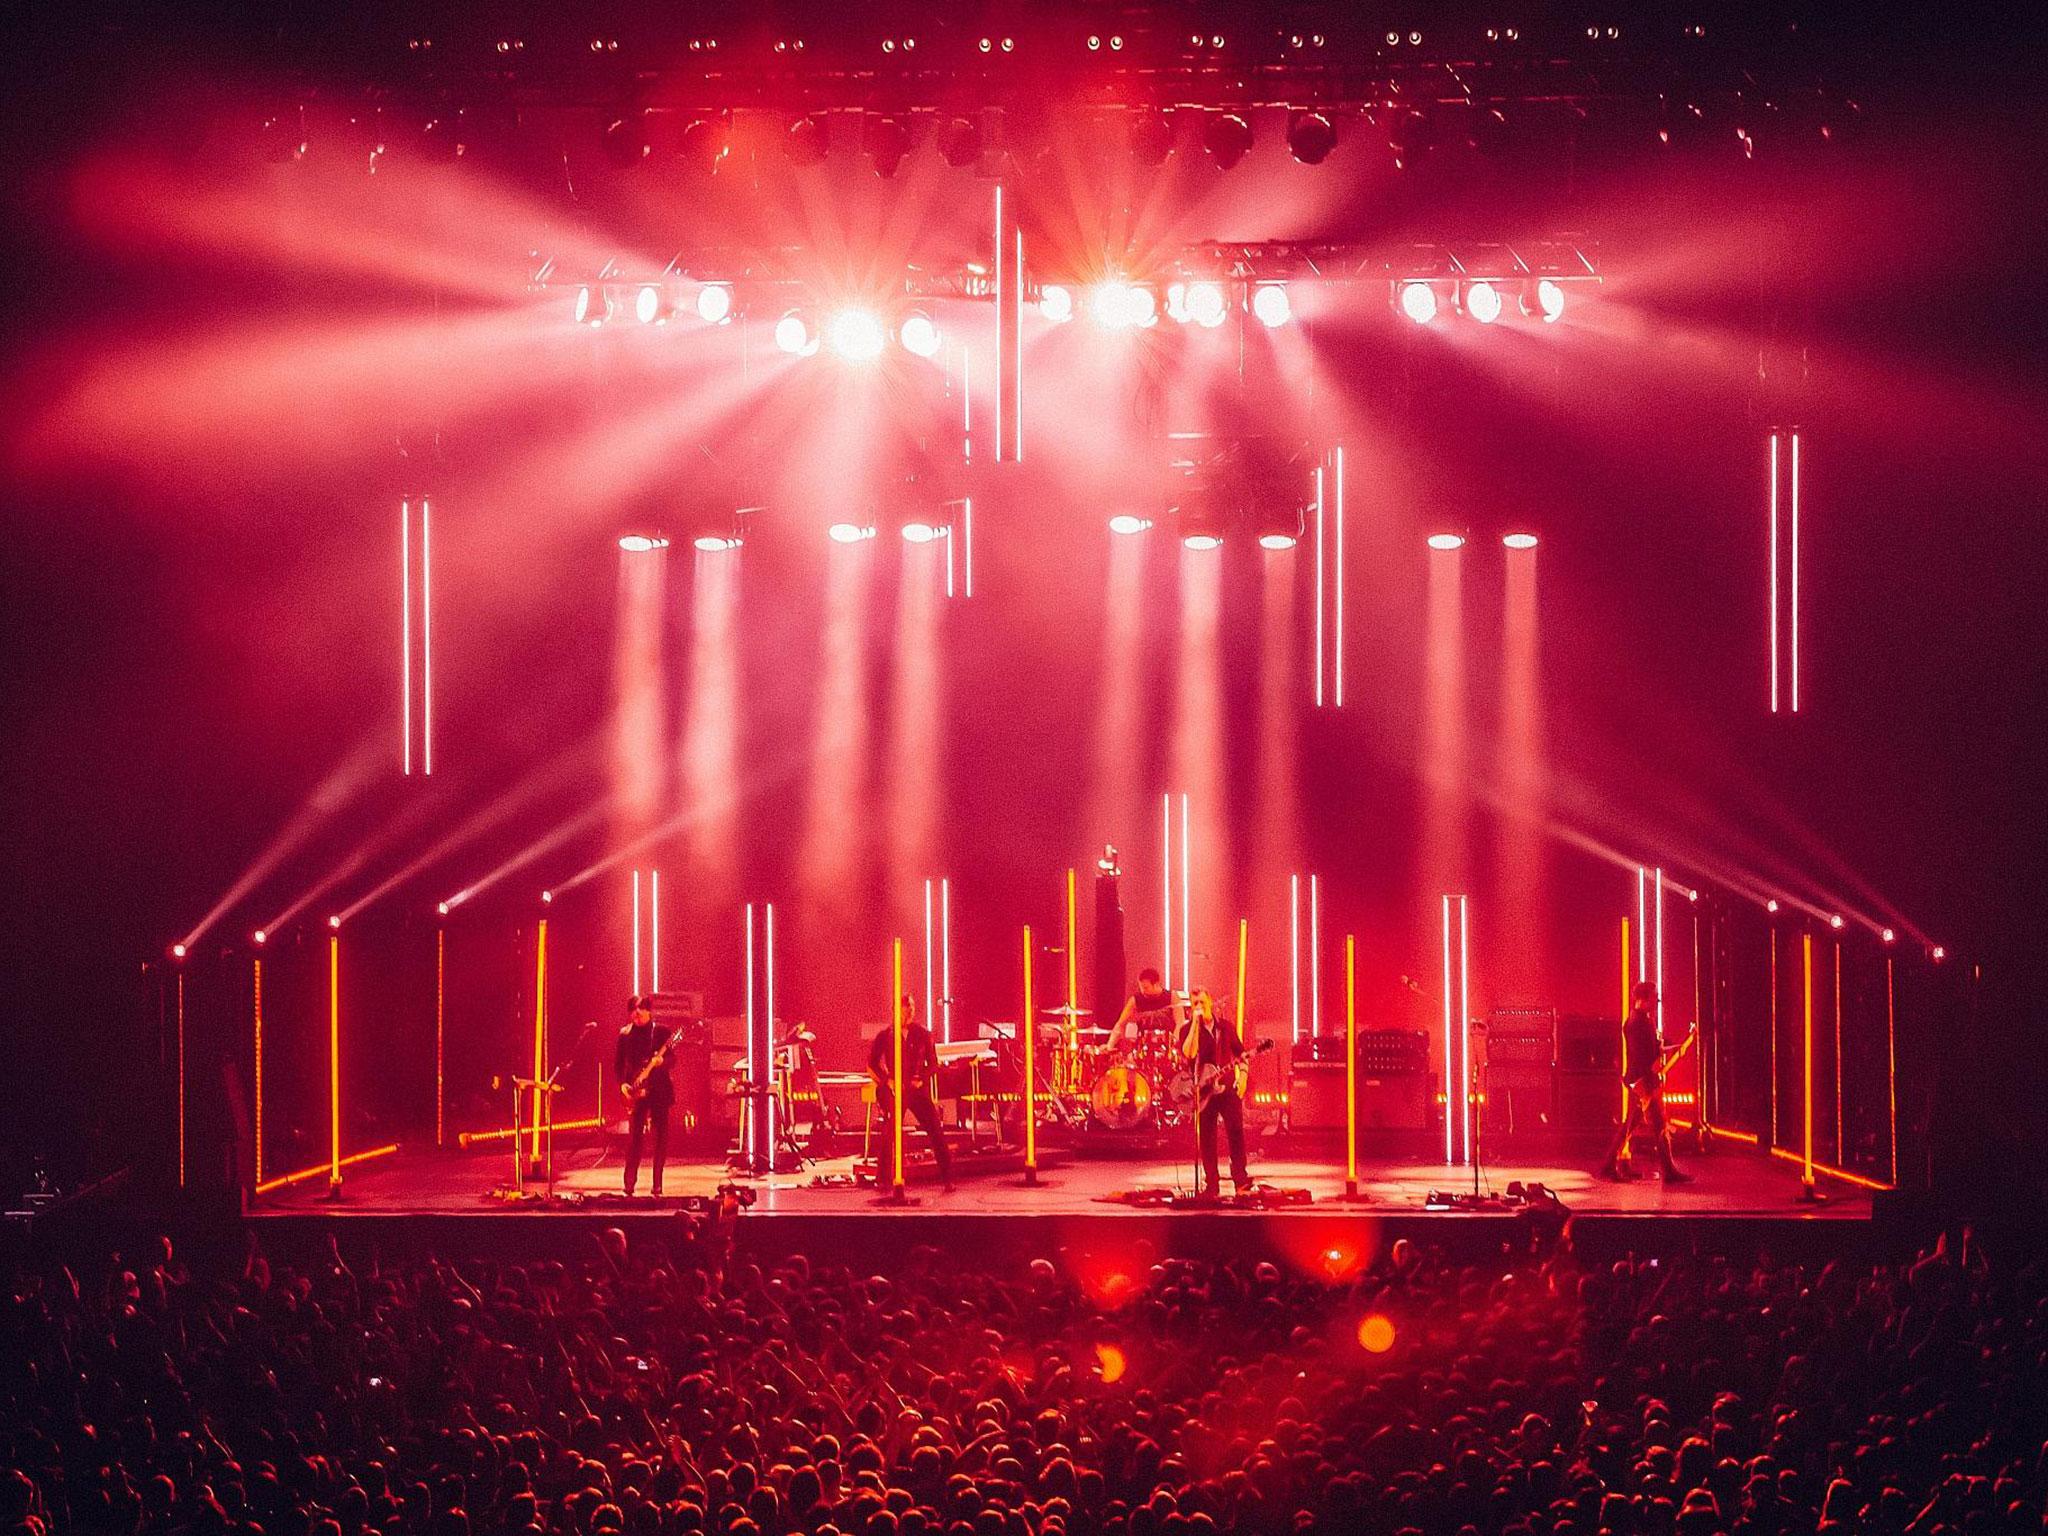 Queens of the Stone Age performing at London's O2 Arena this week